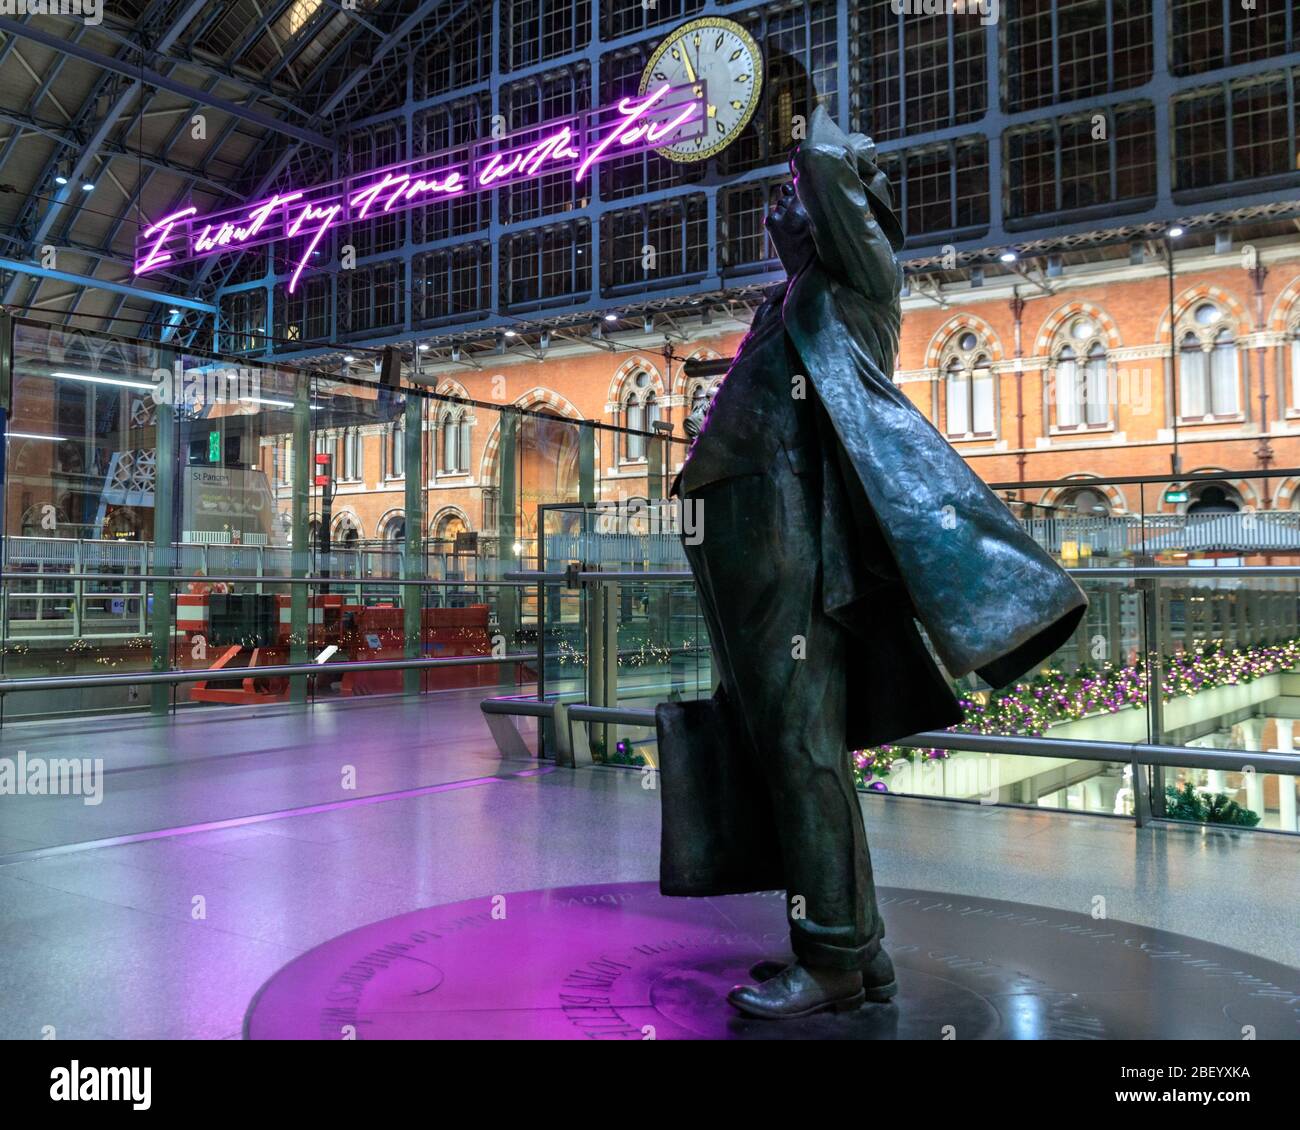 Statue of John Betjeman by Martin Jennings looks up to 'I Want My Time With You' neon art light installation by Tracy Enim St. Pancras Station, London Stock Photo